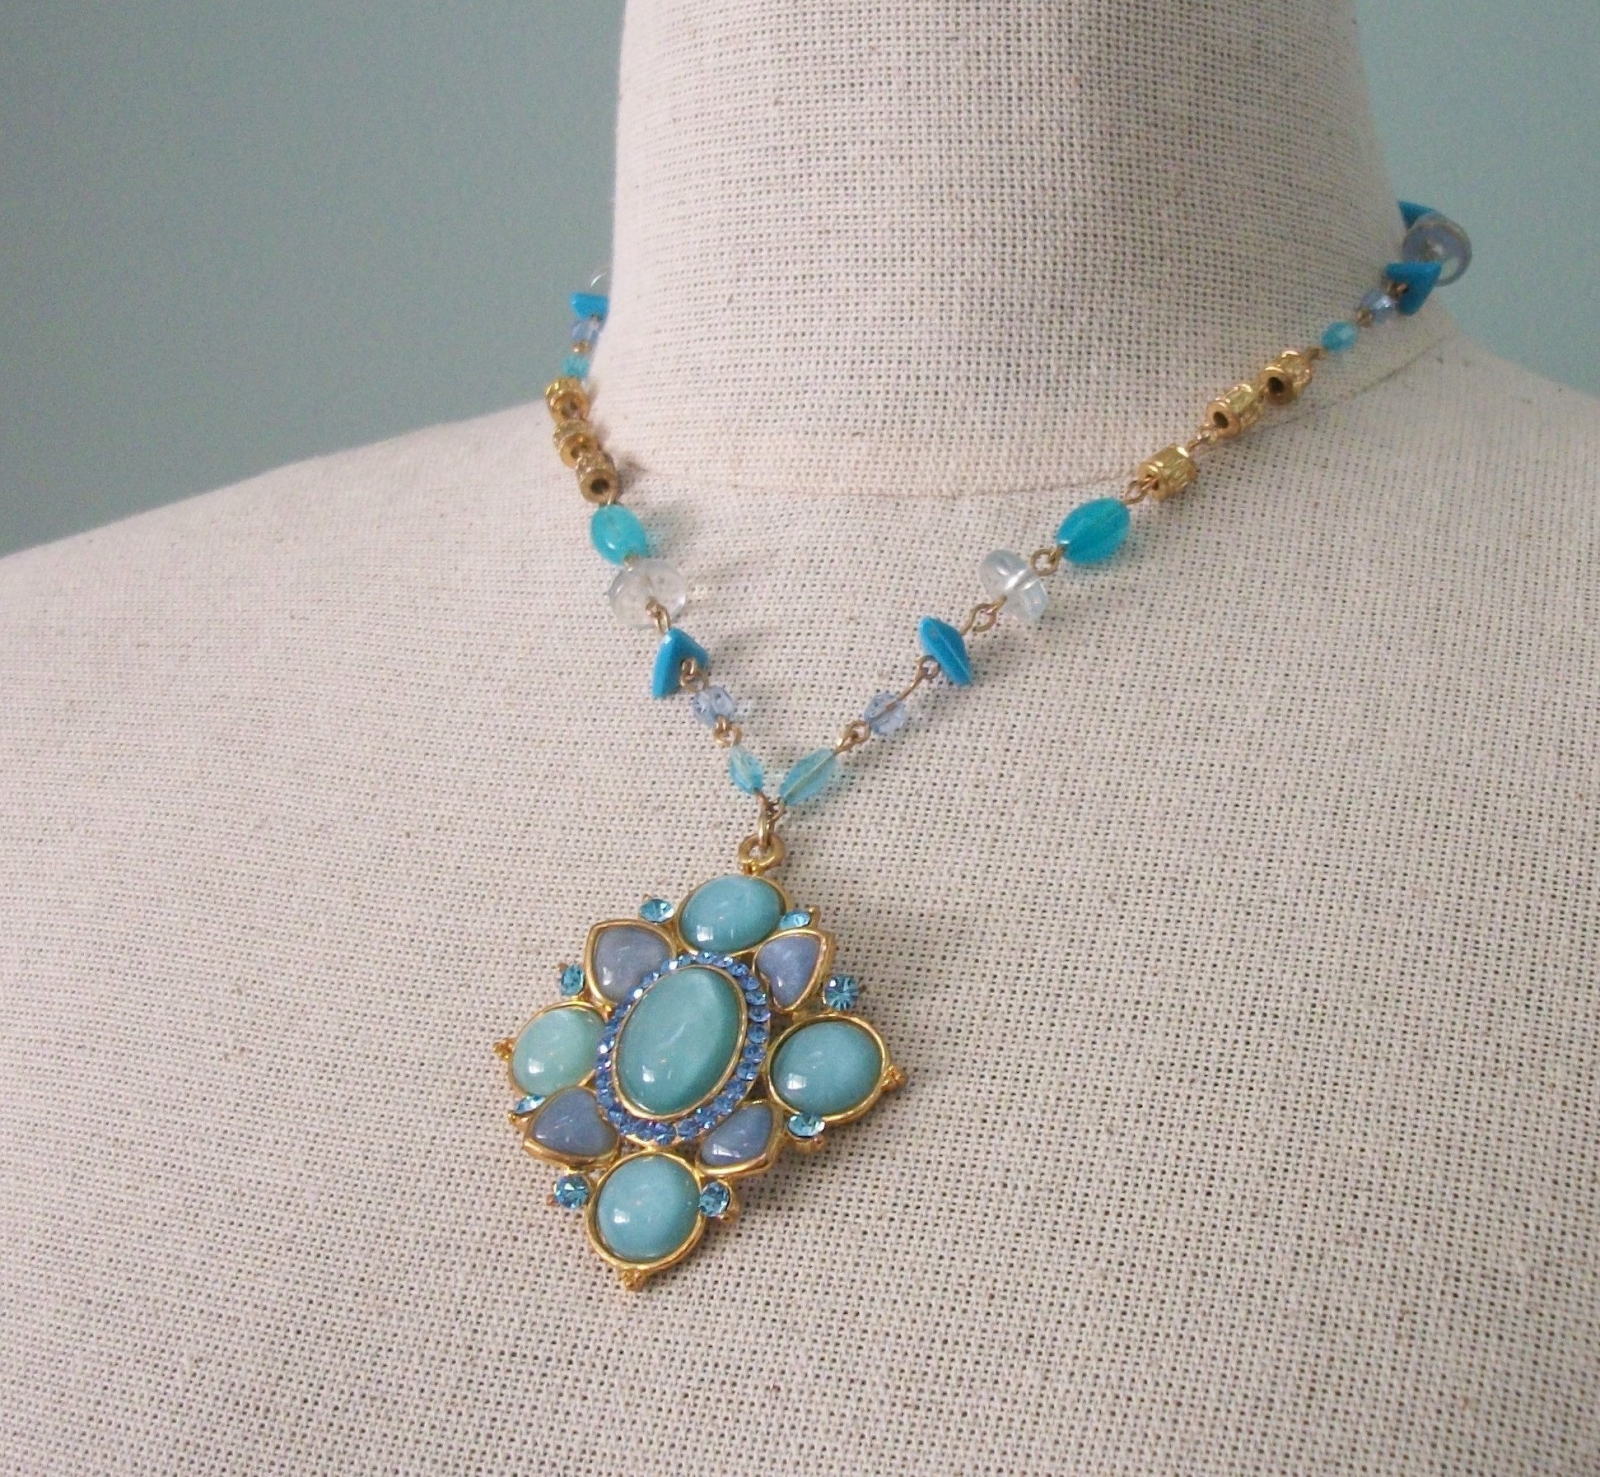 Vintage Blue Moonglow Medallion Pendant Necklace Gold Tone Shades of ...